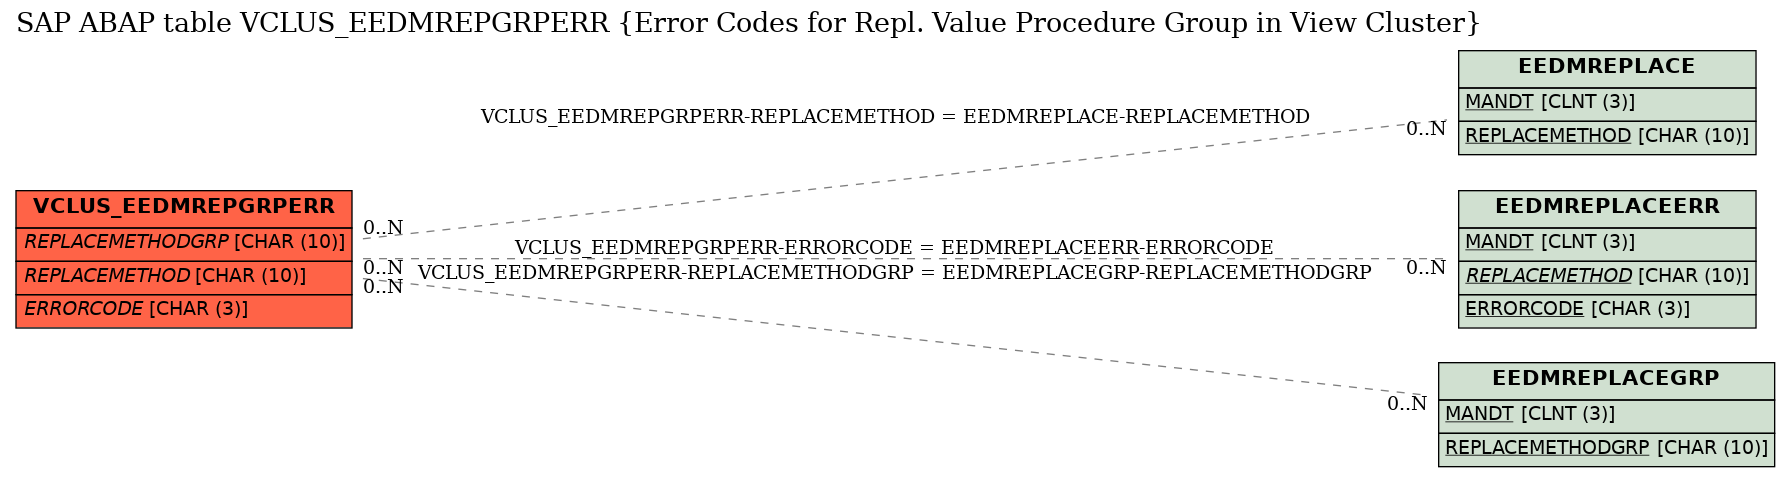 E-R Diagram for table VCLUS_EEDMREPGRPERR (Error Codes for Repl. Value Procedure Group in View Cluster)